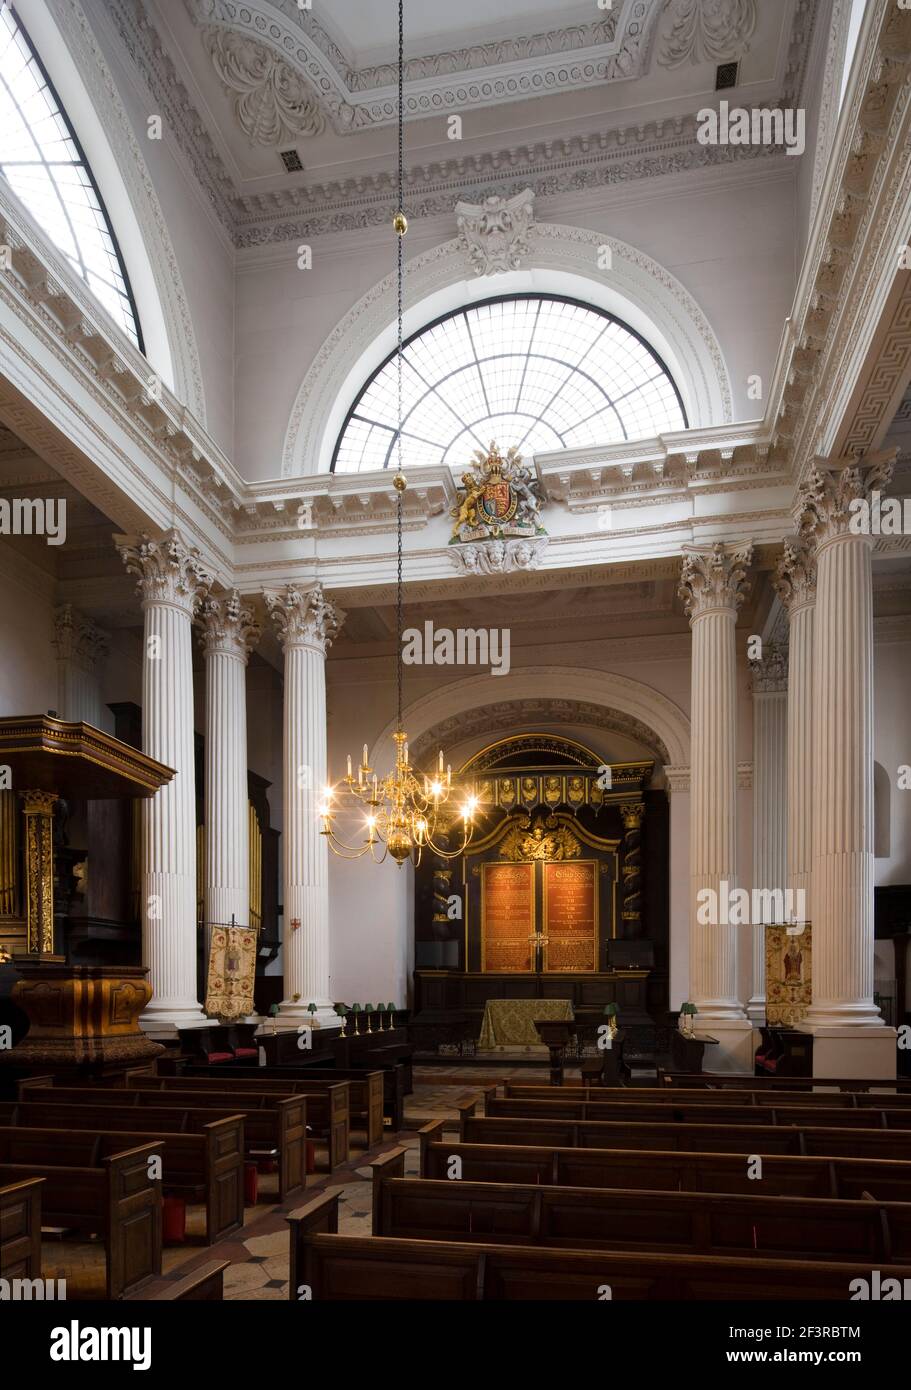 View of altar of St Mary Woolnoth, by Nicholas Hawksmoor, 1711-1716, London Stock Photo